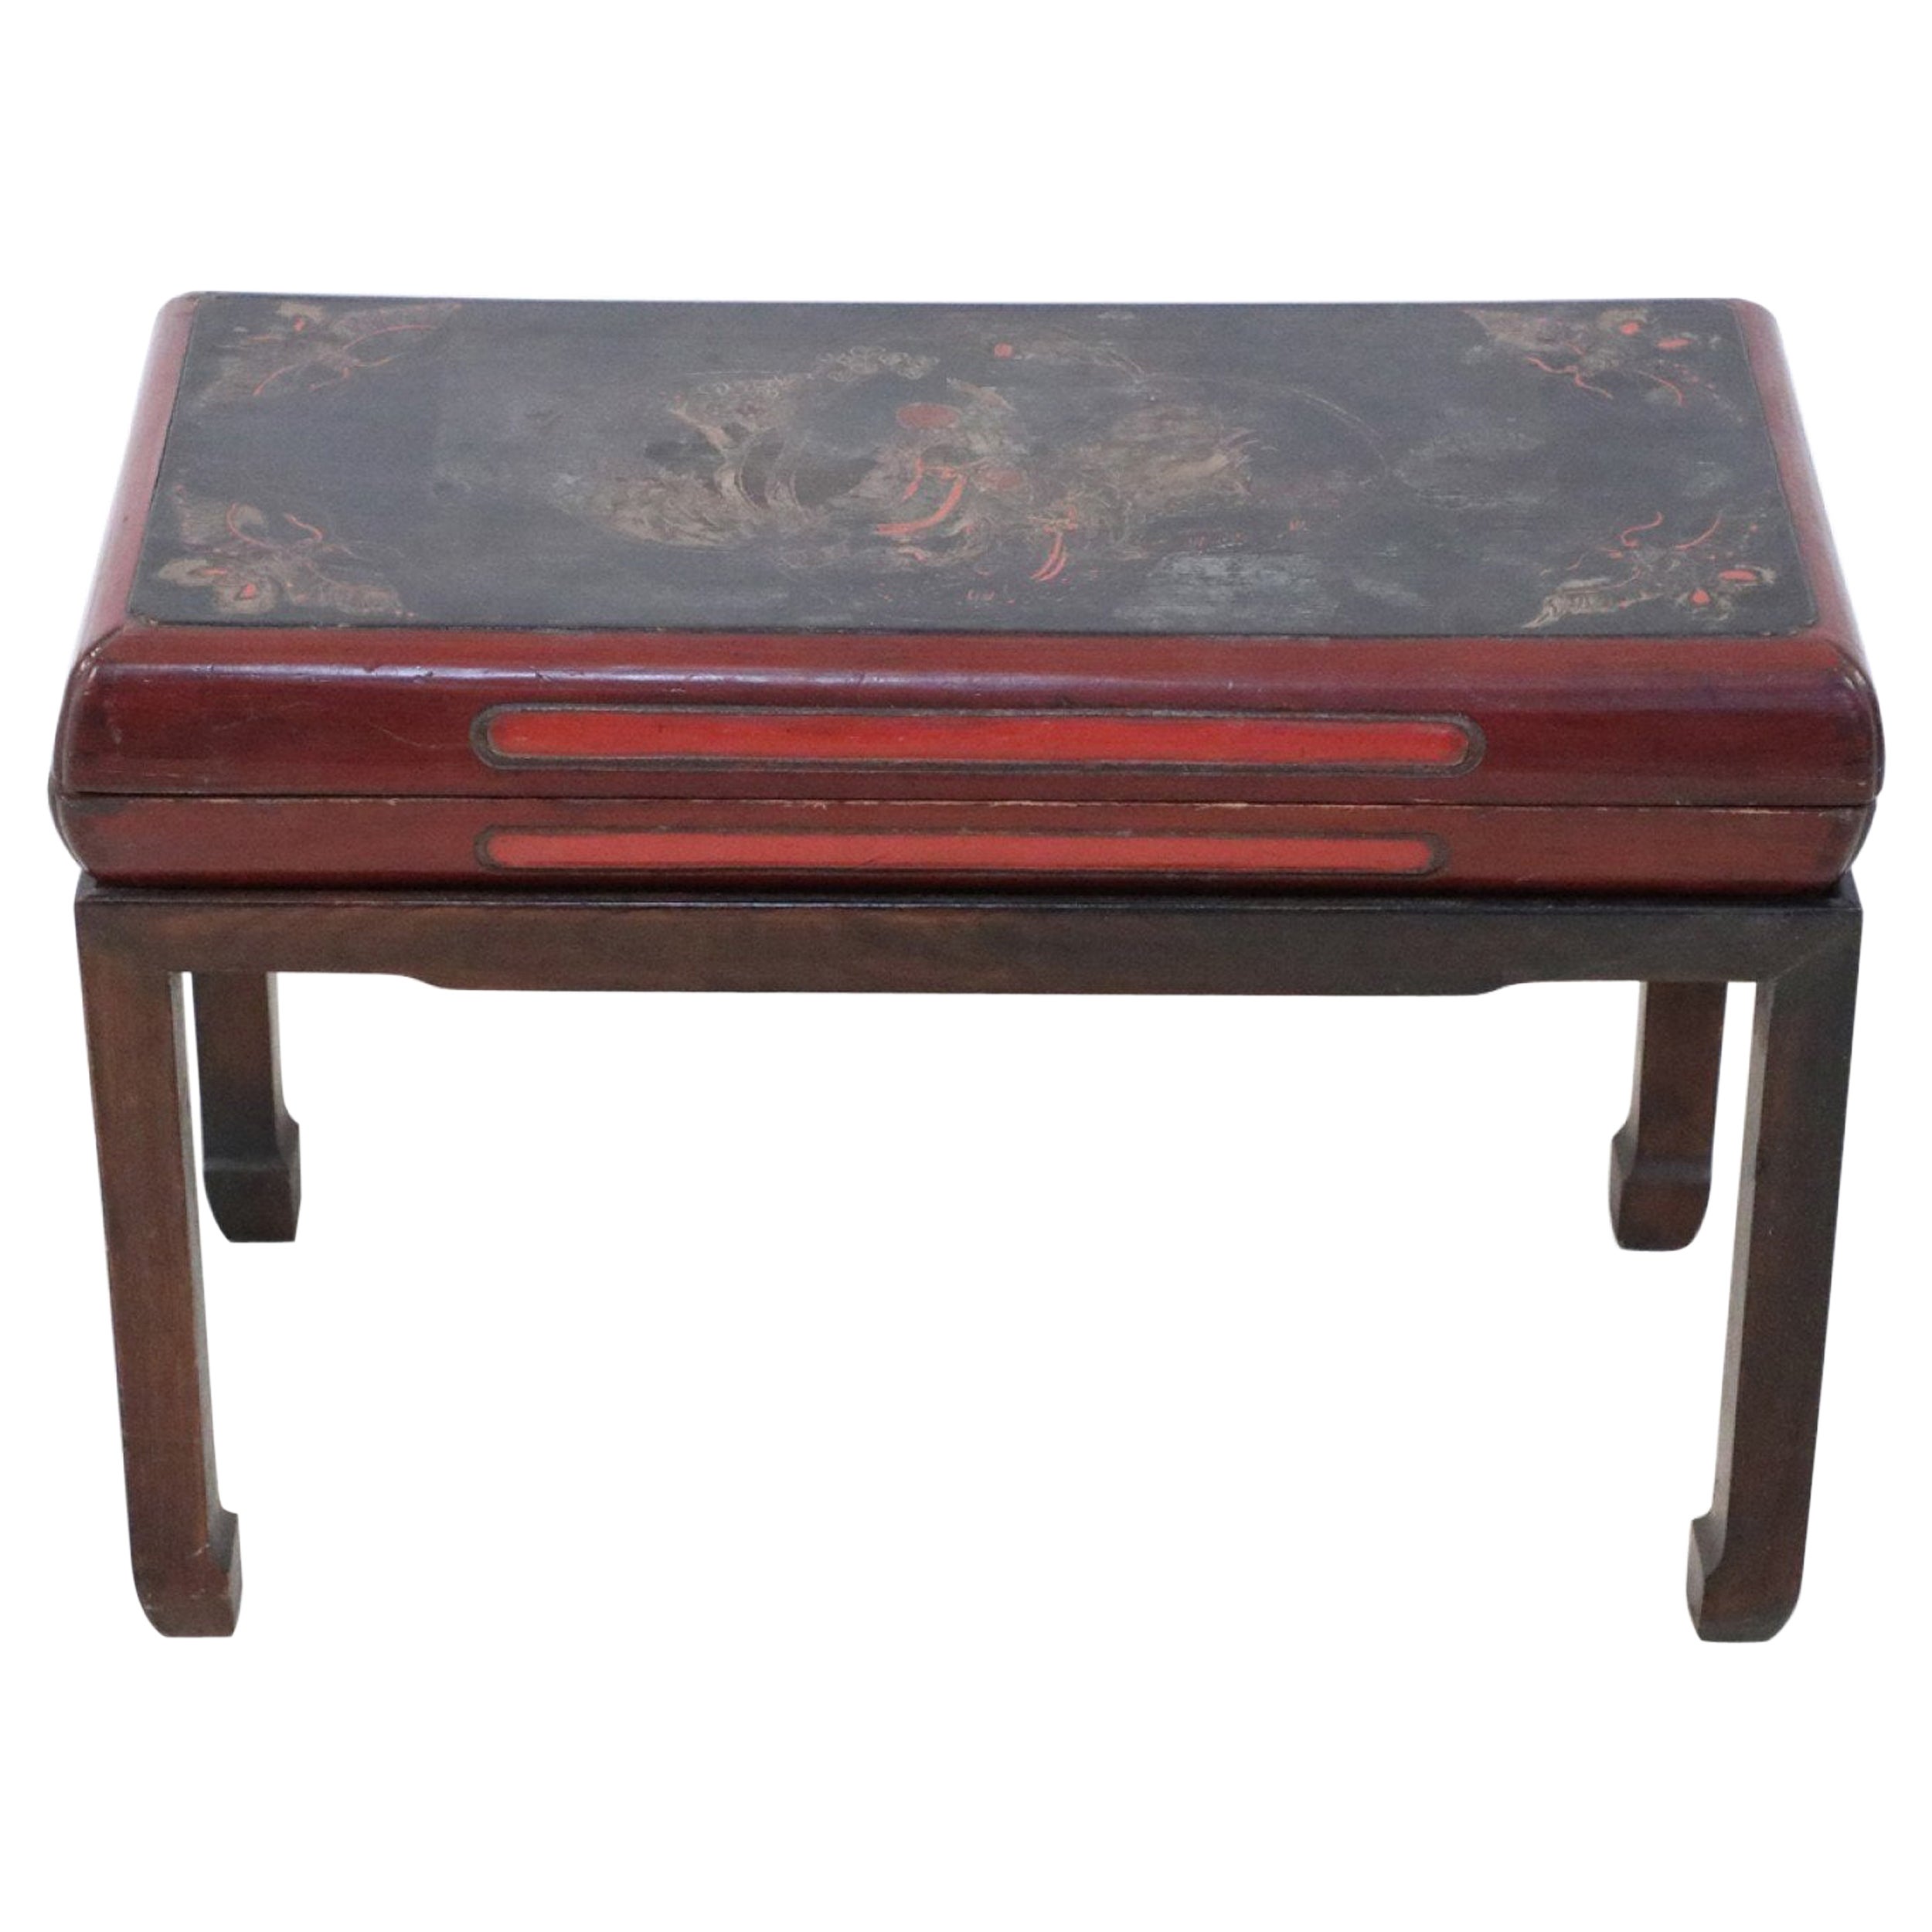 Antique Chinese Red and Brown Wooden Storage Bench